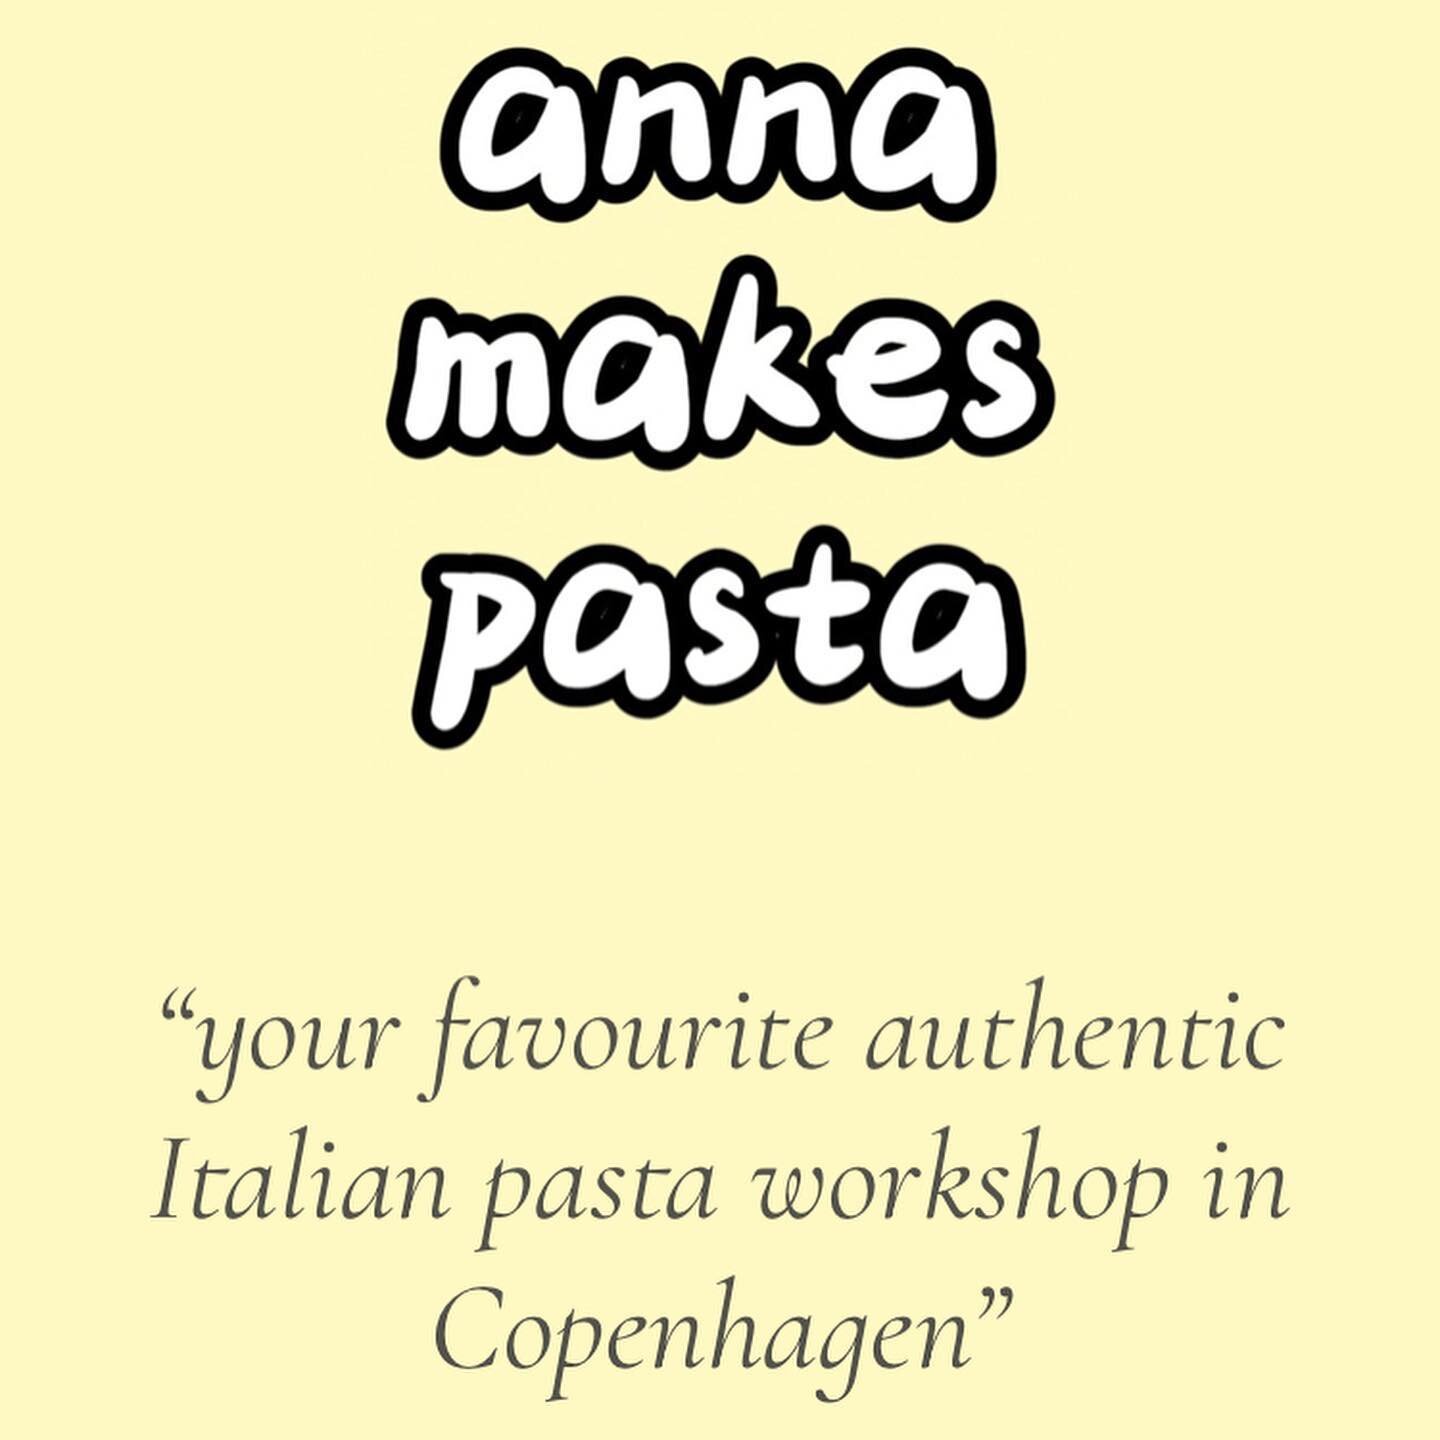 annamakespasta&rsquo;s WEBSITE is out!🚀🫶🏻🥹 we&rsquo;re so so so happy to share this great achievement with you! 🍝

#annamakespasta #website #pastalovers #italian #cookingclasses #k&oslash;benhavn #live #pasta